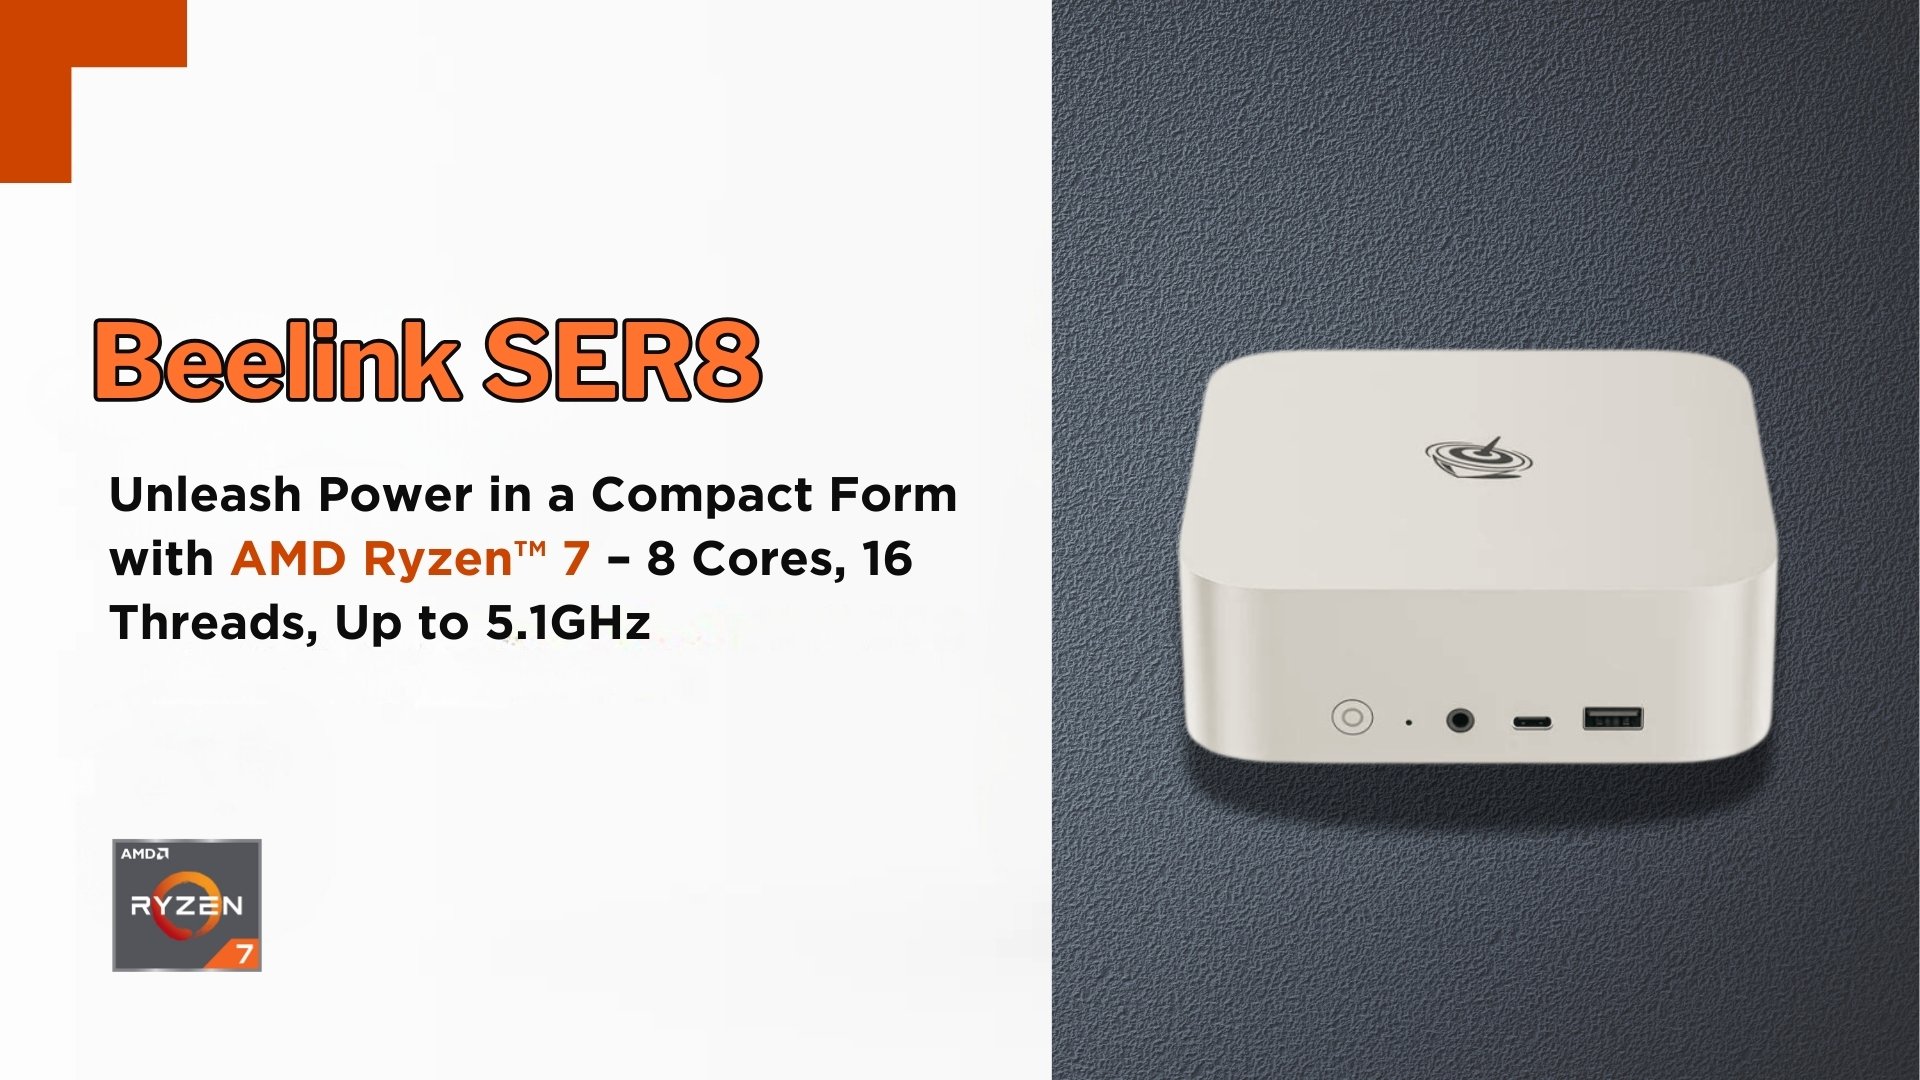 Beelink SER8 AMD Ryzen™ 7 Mini PC: Compact and Powerful 8 Cores/16 Threads Frequency up to 5.1GHz